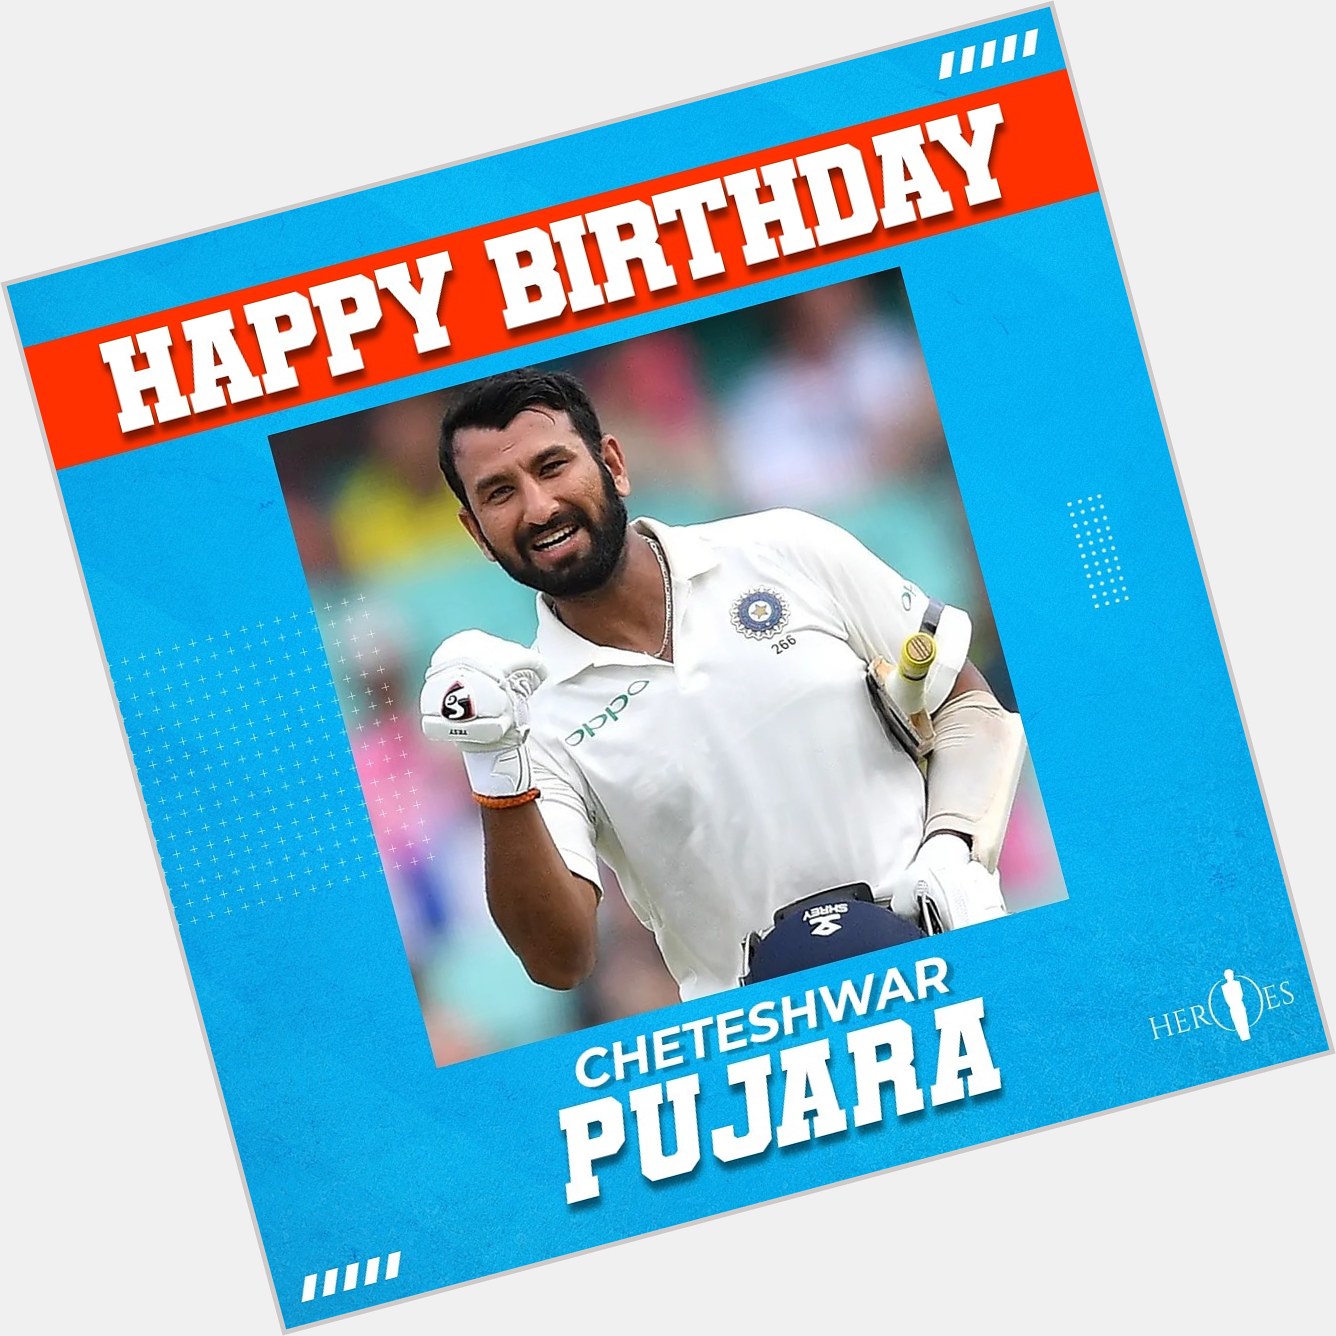 When tough situations call, Cheteshwar Pujara answers. Happy birthday to Mr. Dependable    